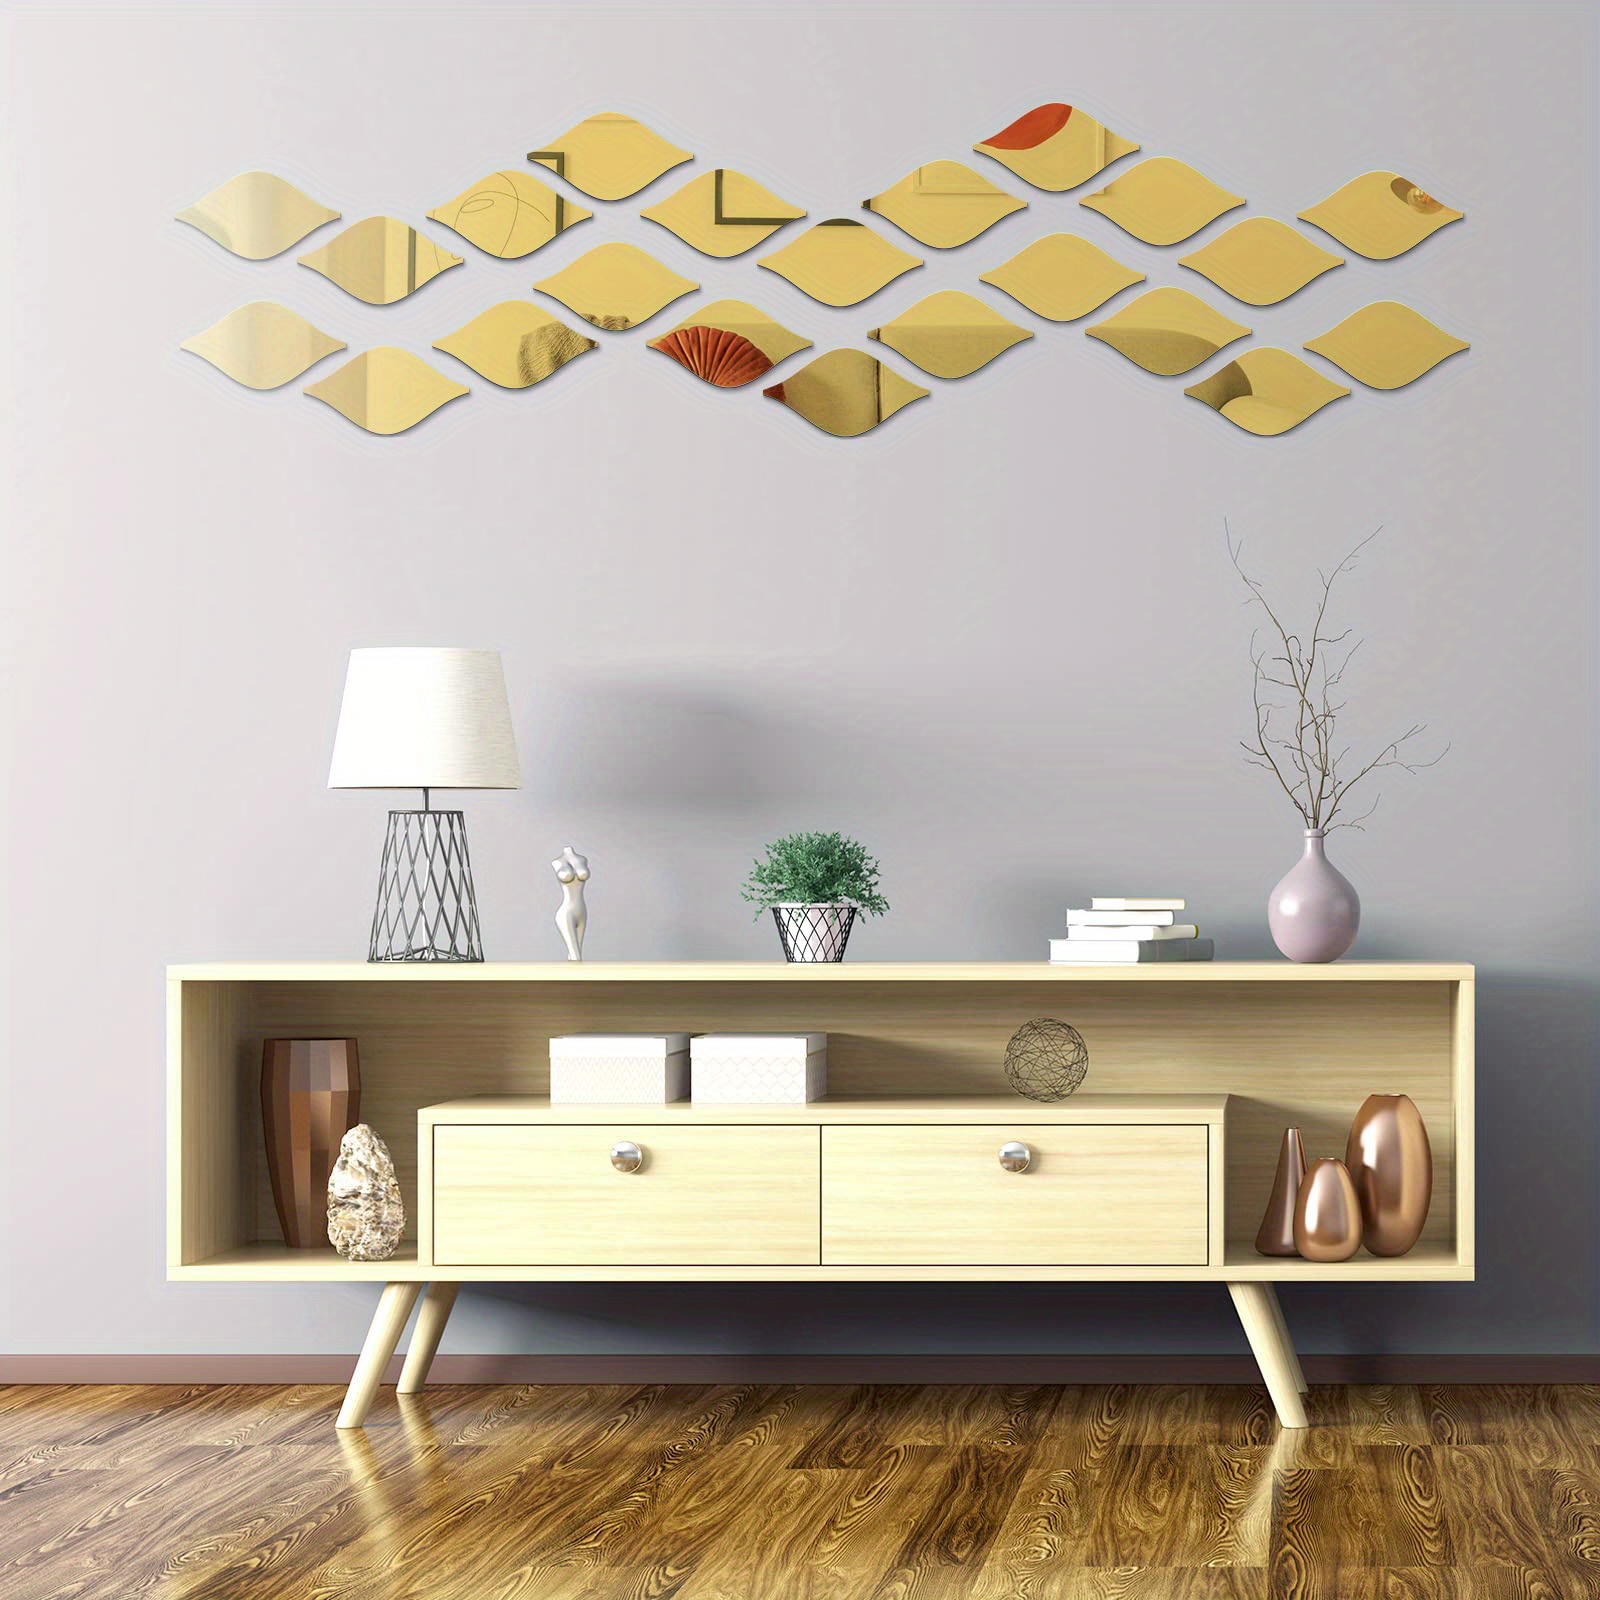 Mirror Wall Decals, Mirror Wall Stickers, Diy Wall Stickers